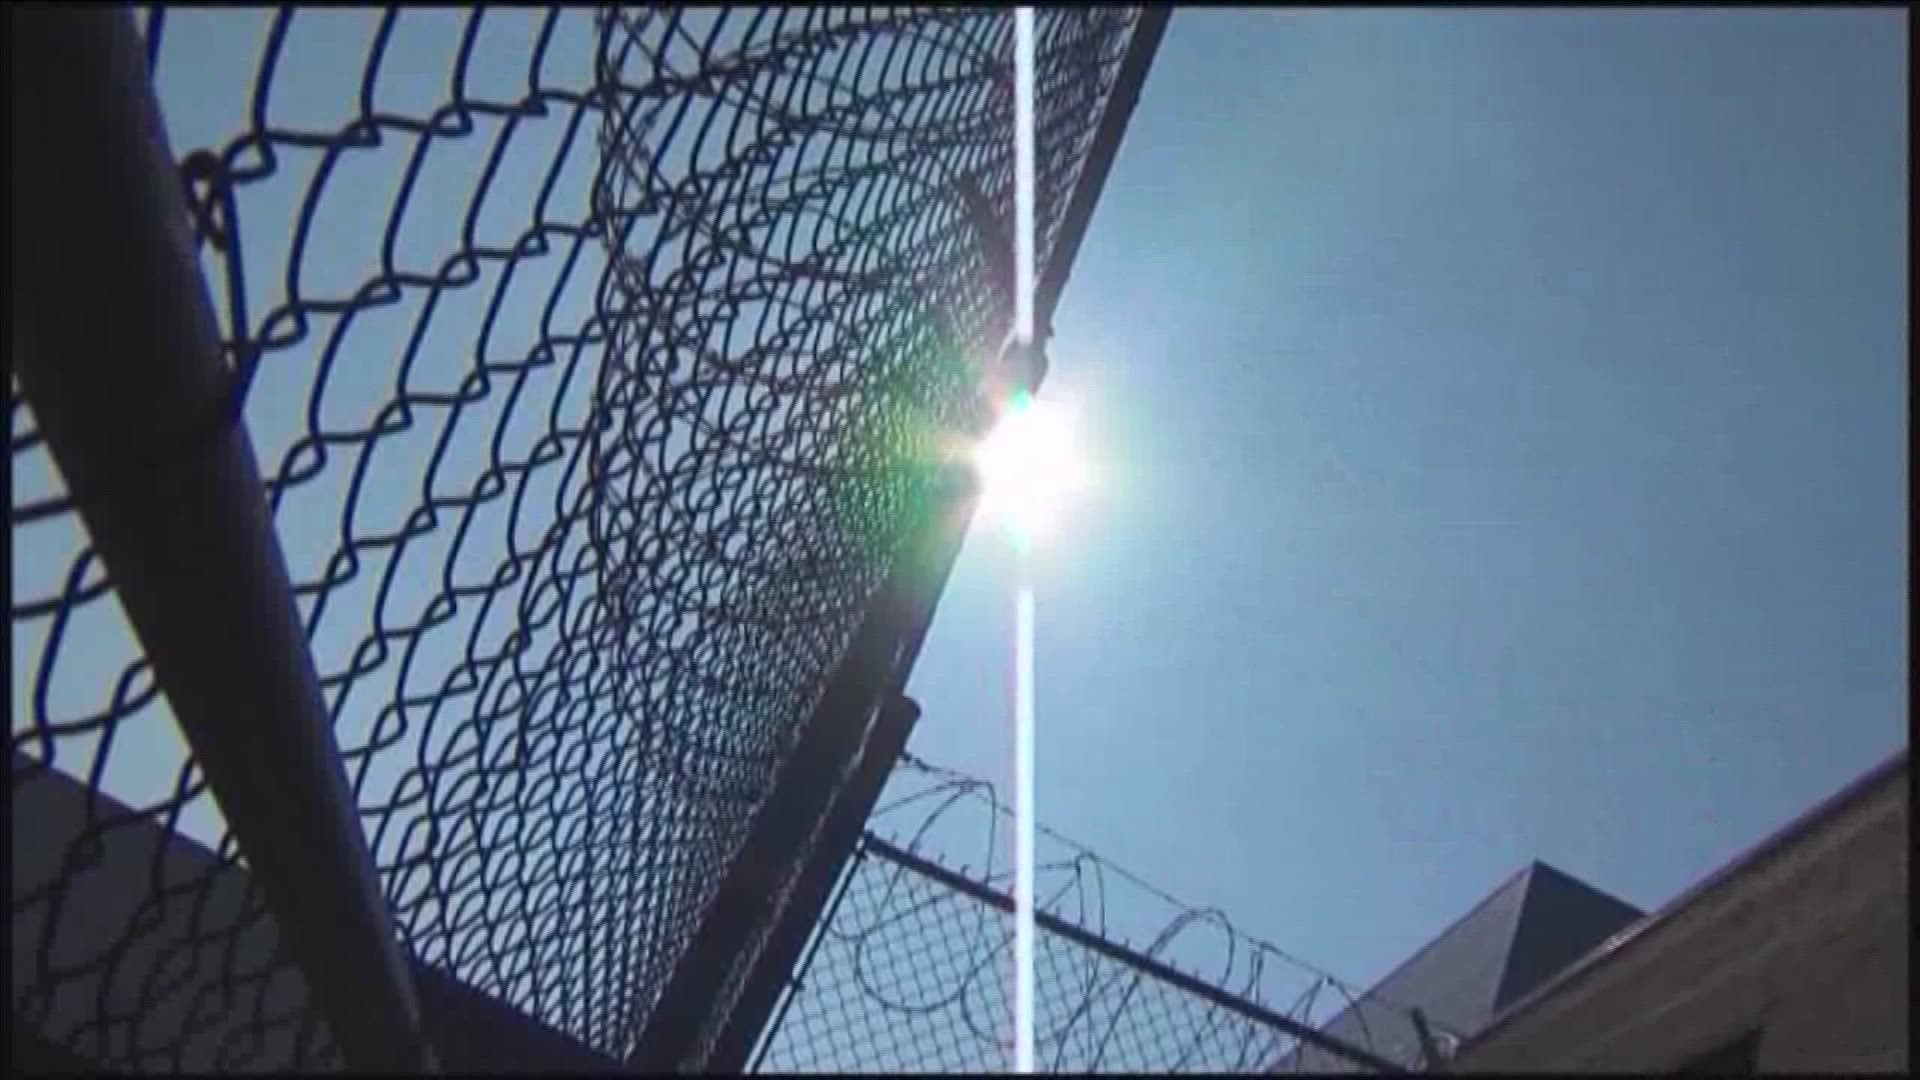 A group is working to reduce the number of former inmates with no place to live.